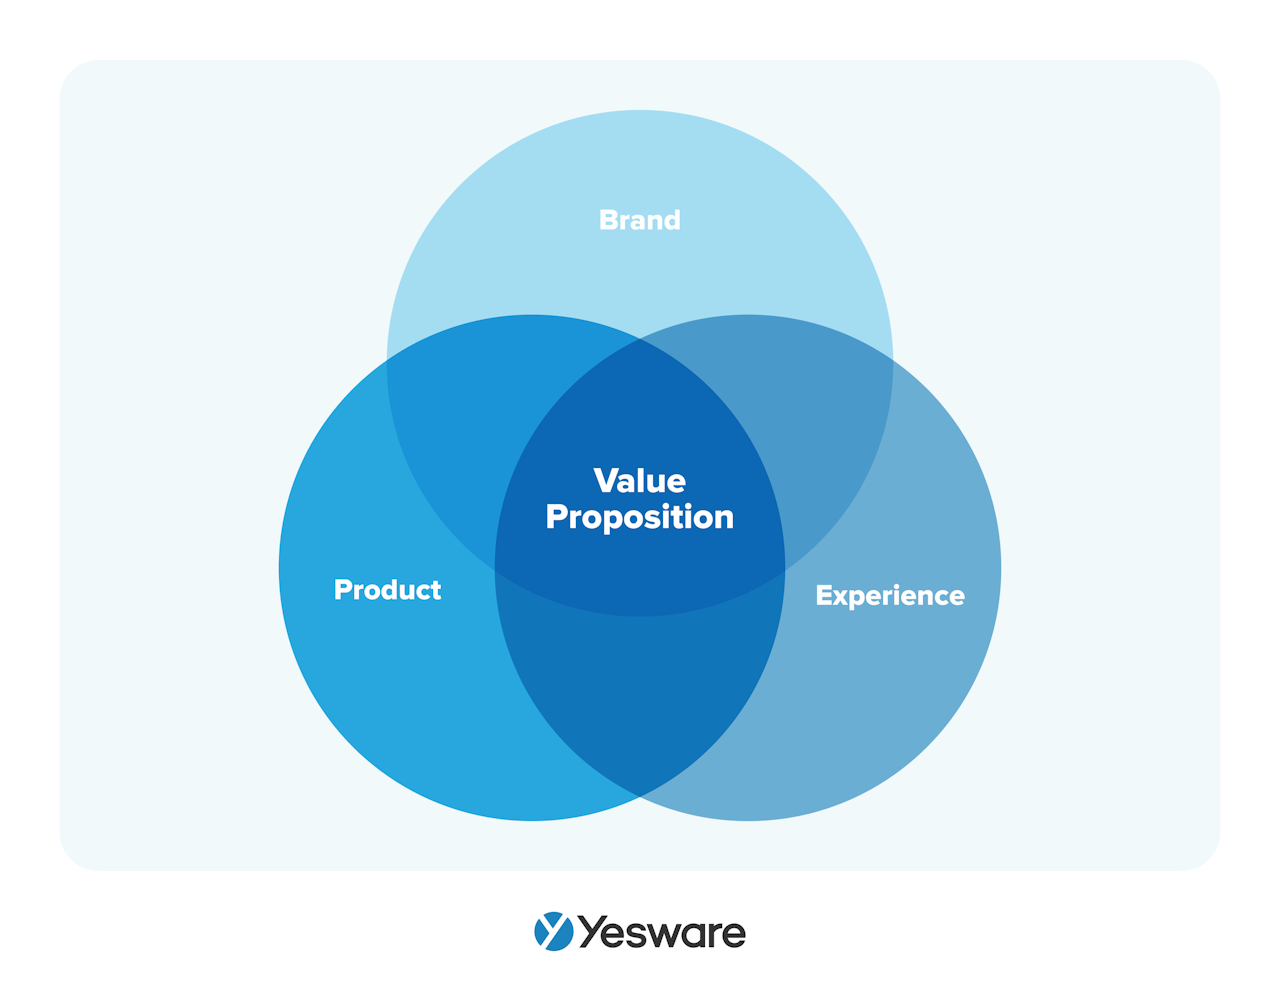 B2B Sales Strategy: Value Proposition